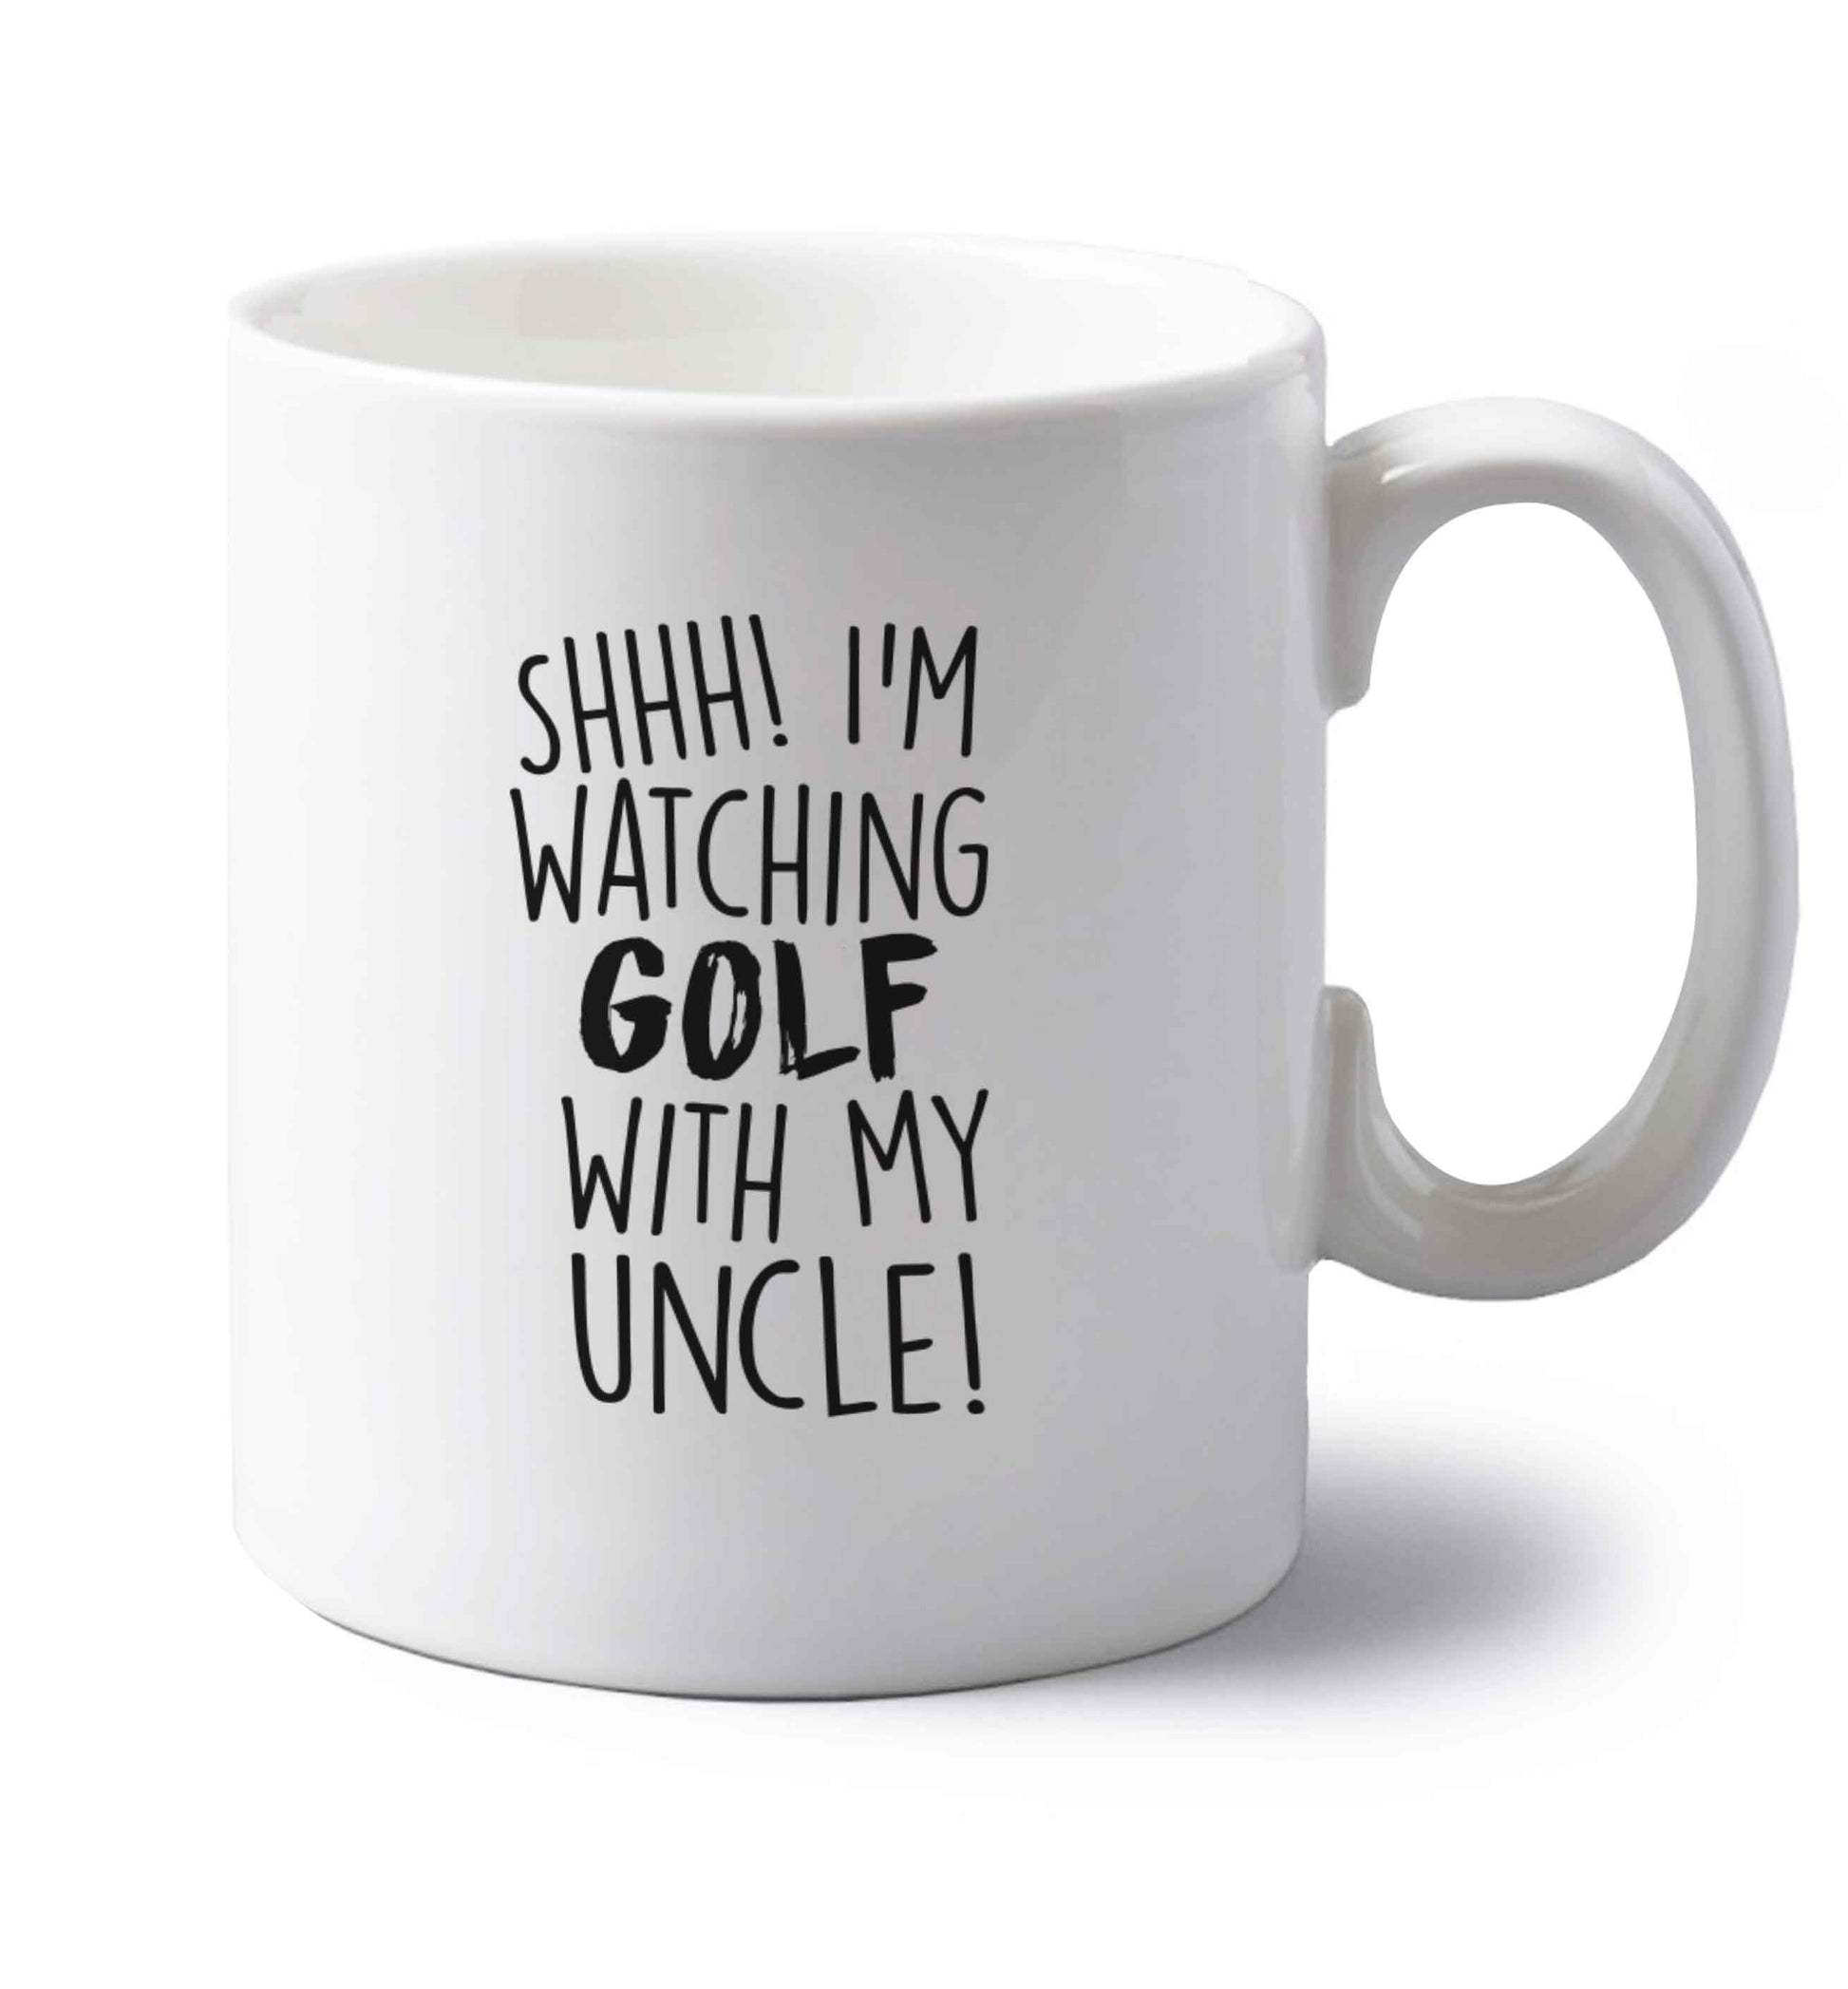 Shh I'm watching golf with my uncle left handed white ceramic mug 